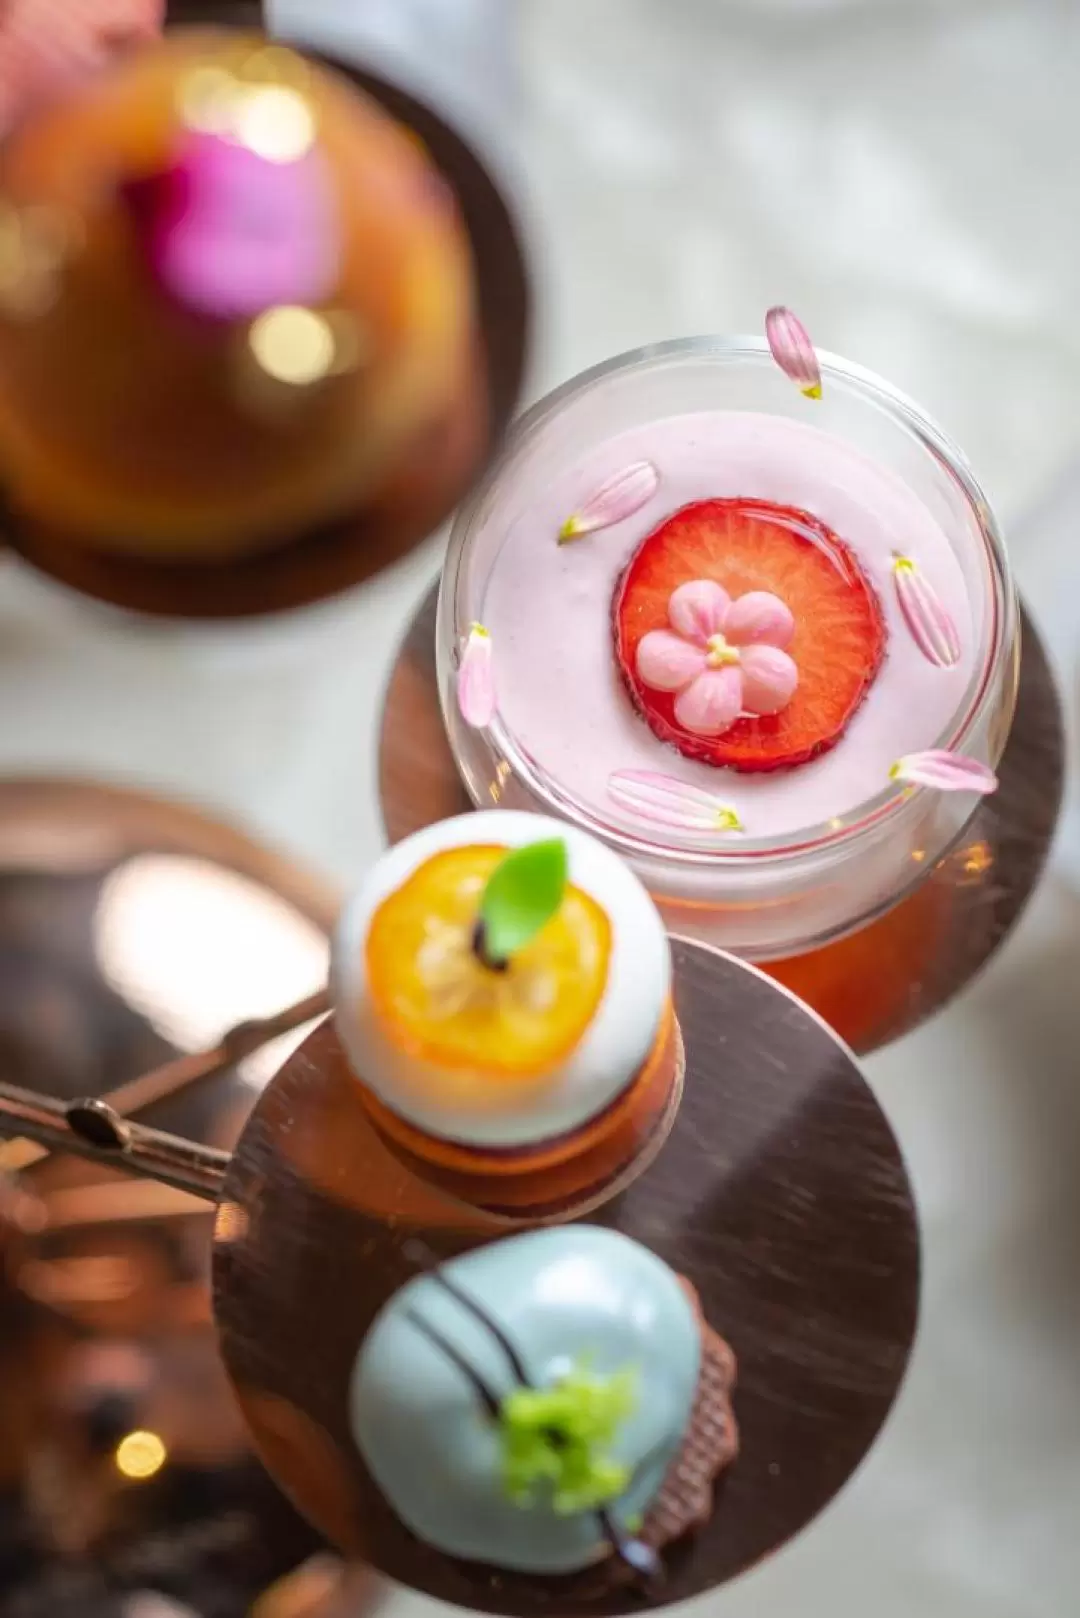 Xiao Ting - An elegant afternoon tea venue at Four Seasons Macao